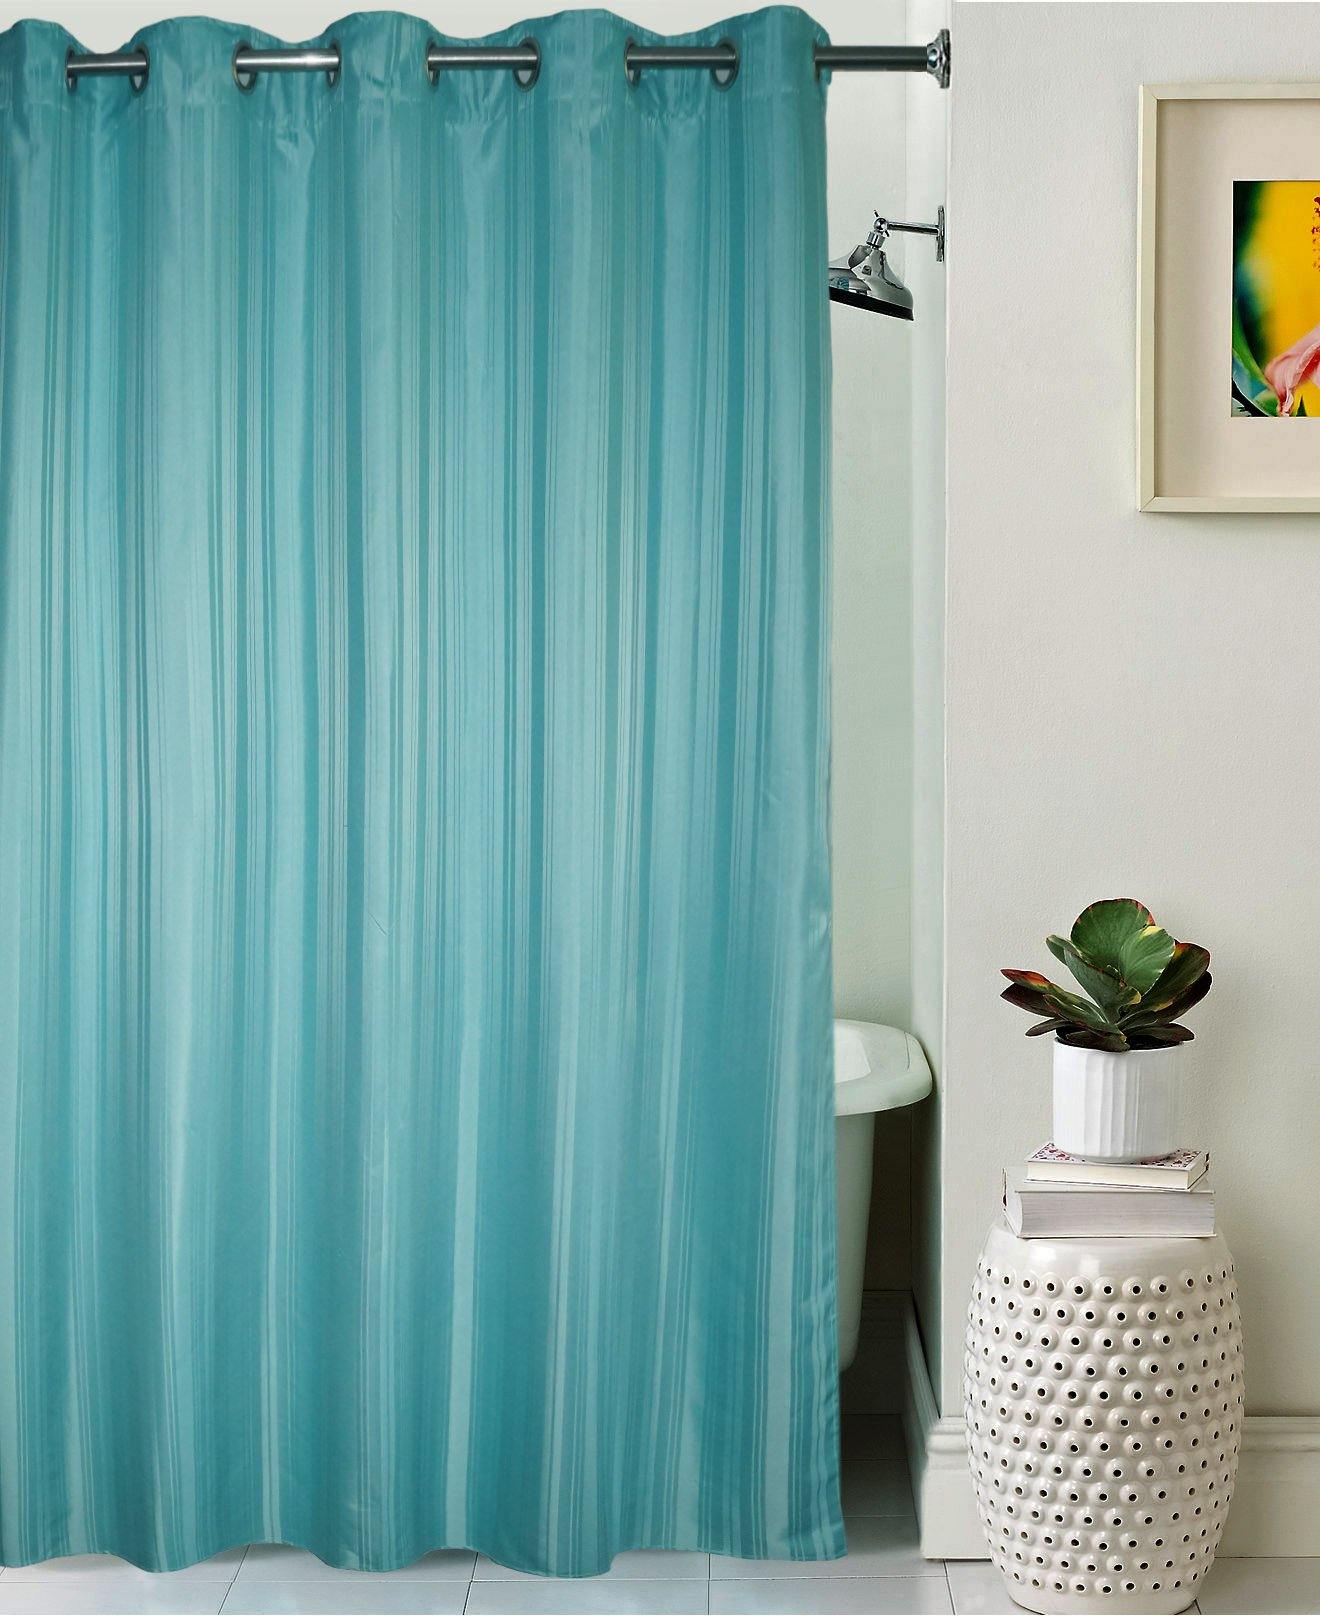 Lushomes Green Stripes Polyester Bathroom Waterproof Shower Curtain with 10 Eyelets - Lushomes